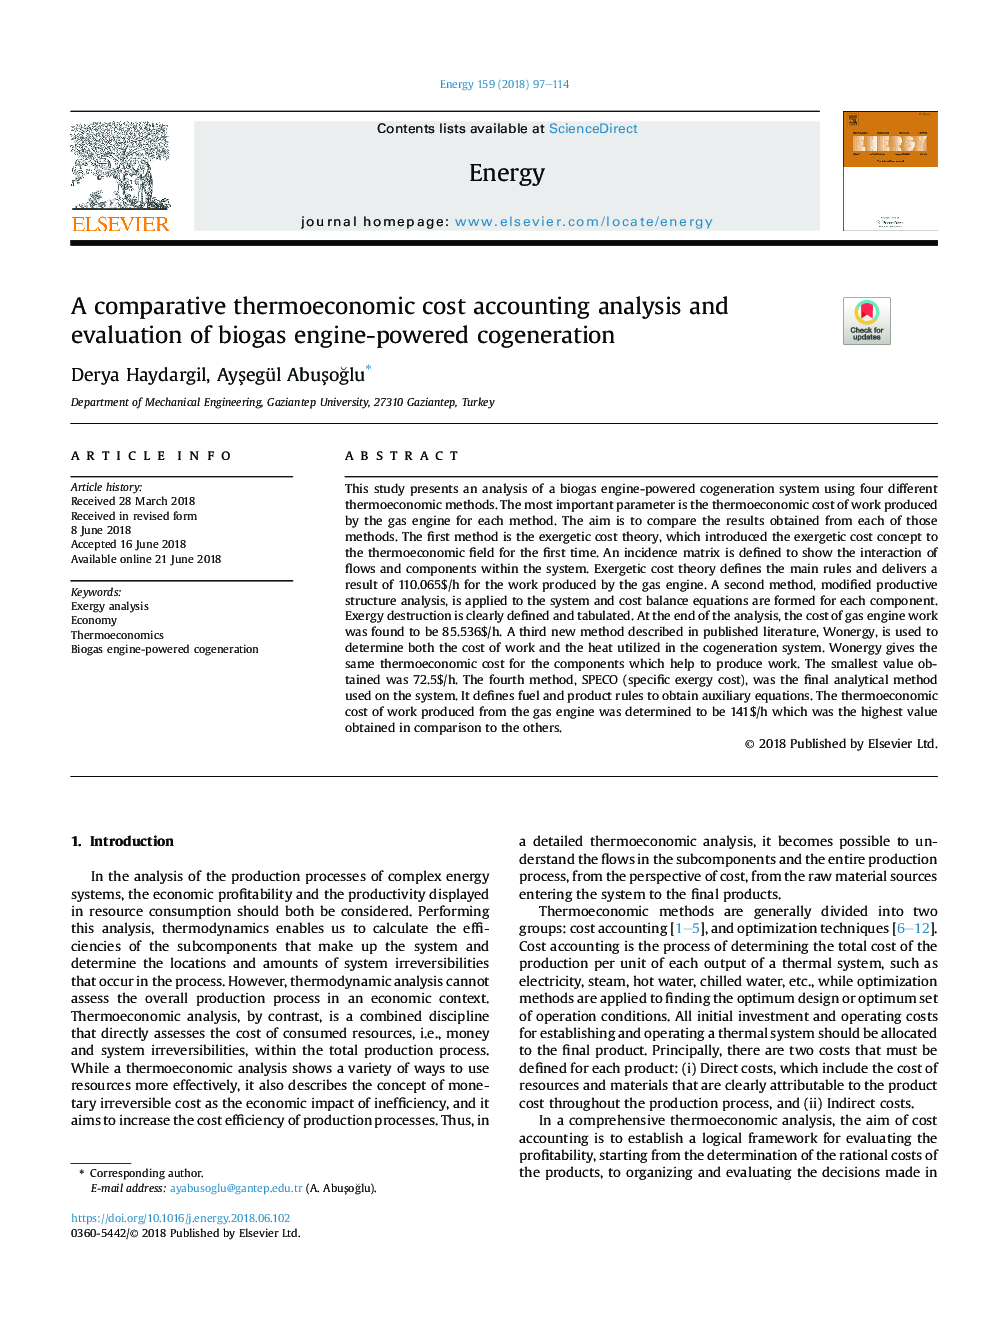 A comparative thermoeconomic cost accounting analysis and evaluation of biogas engine-powered cogeneration